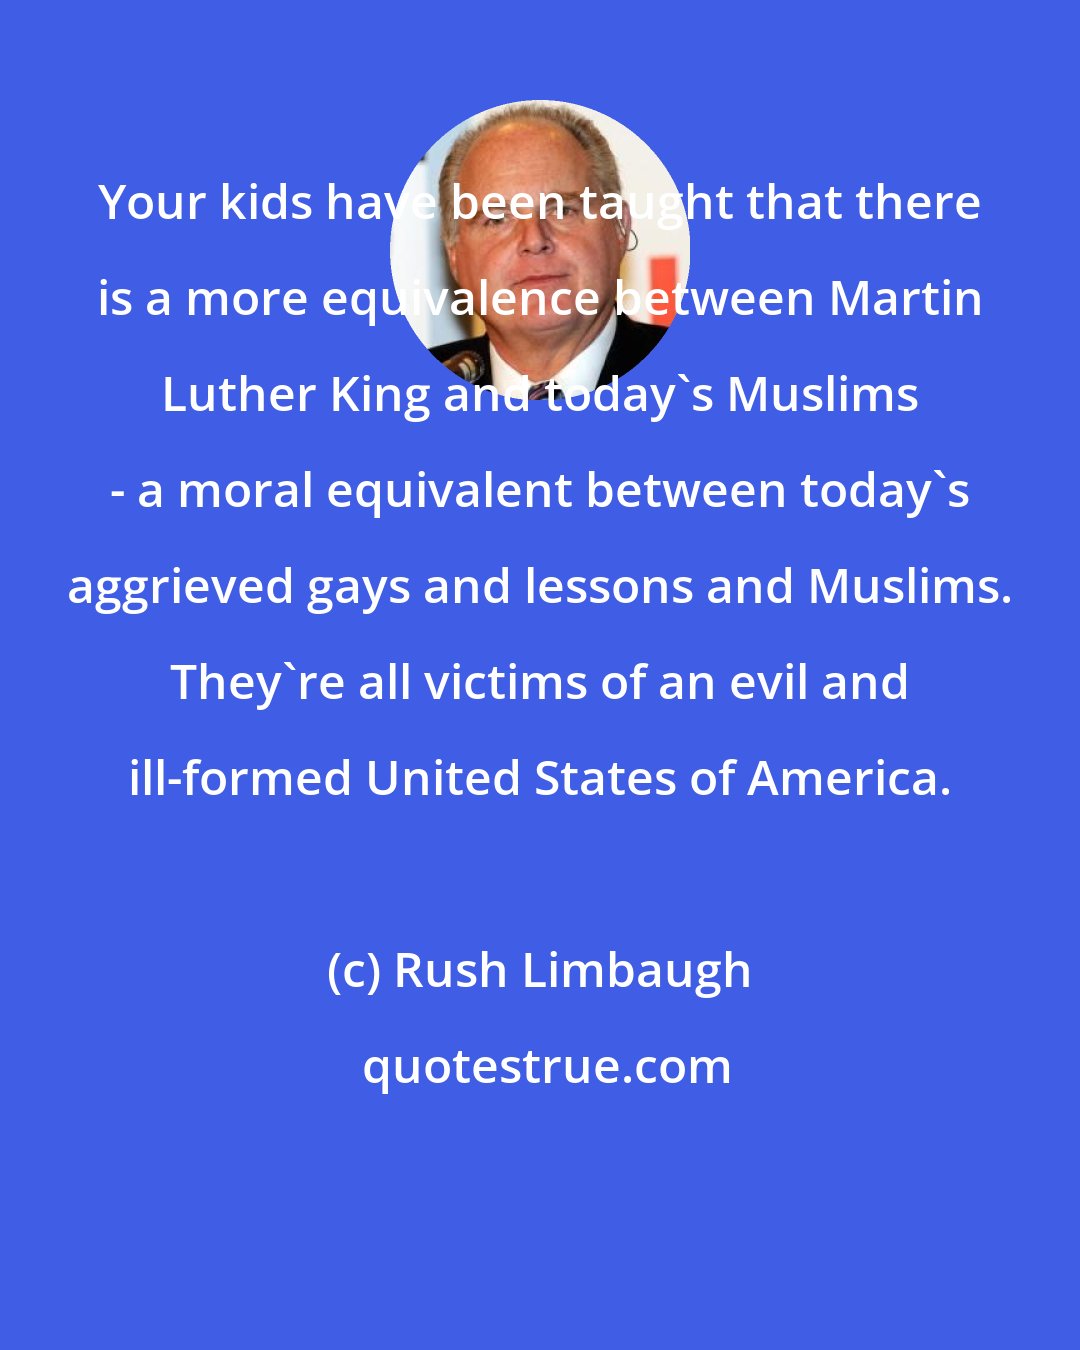 Rush Limbaugh: Your kids have been taught that there is a more equivalence between Martin Luther King and today's Muslims - a moral equivalent between today's aggrieved gays and lessons and Muslims. They're all victims of an evil and ill-formed United States of America.